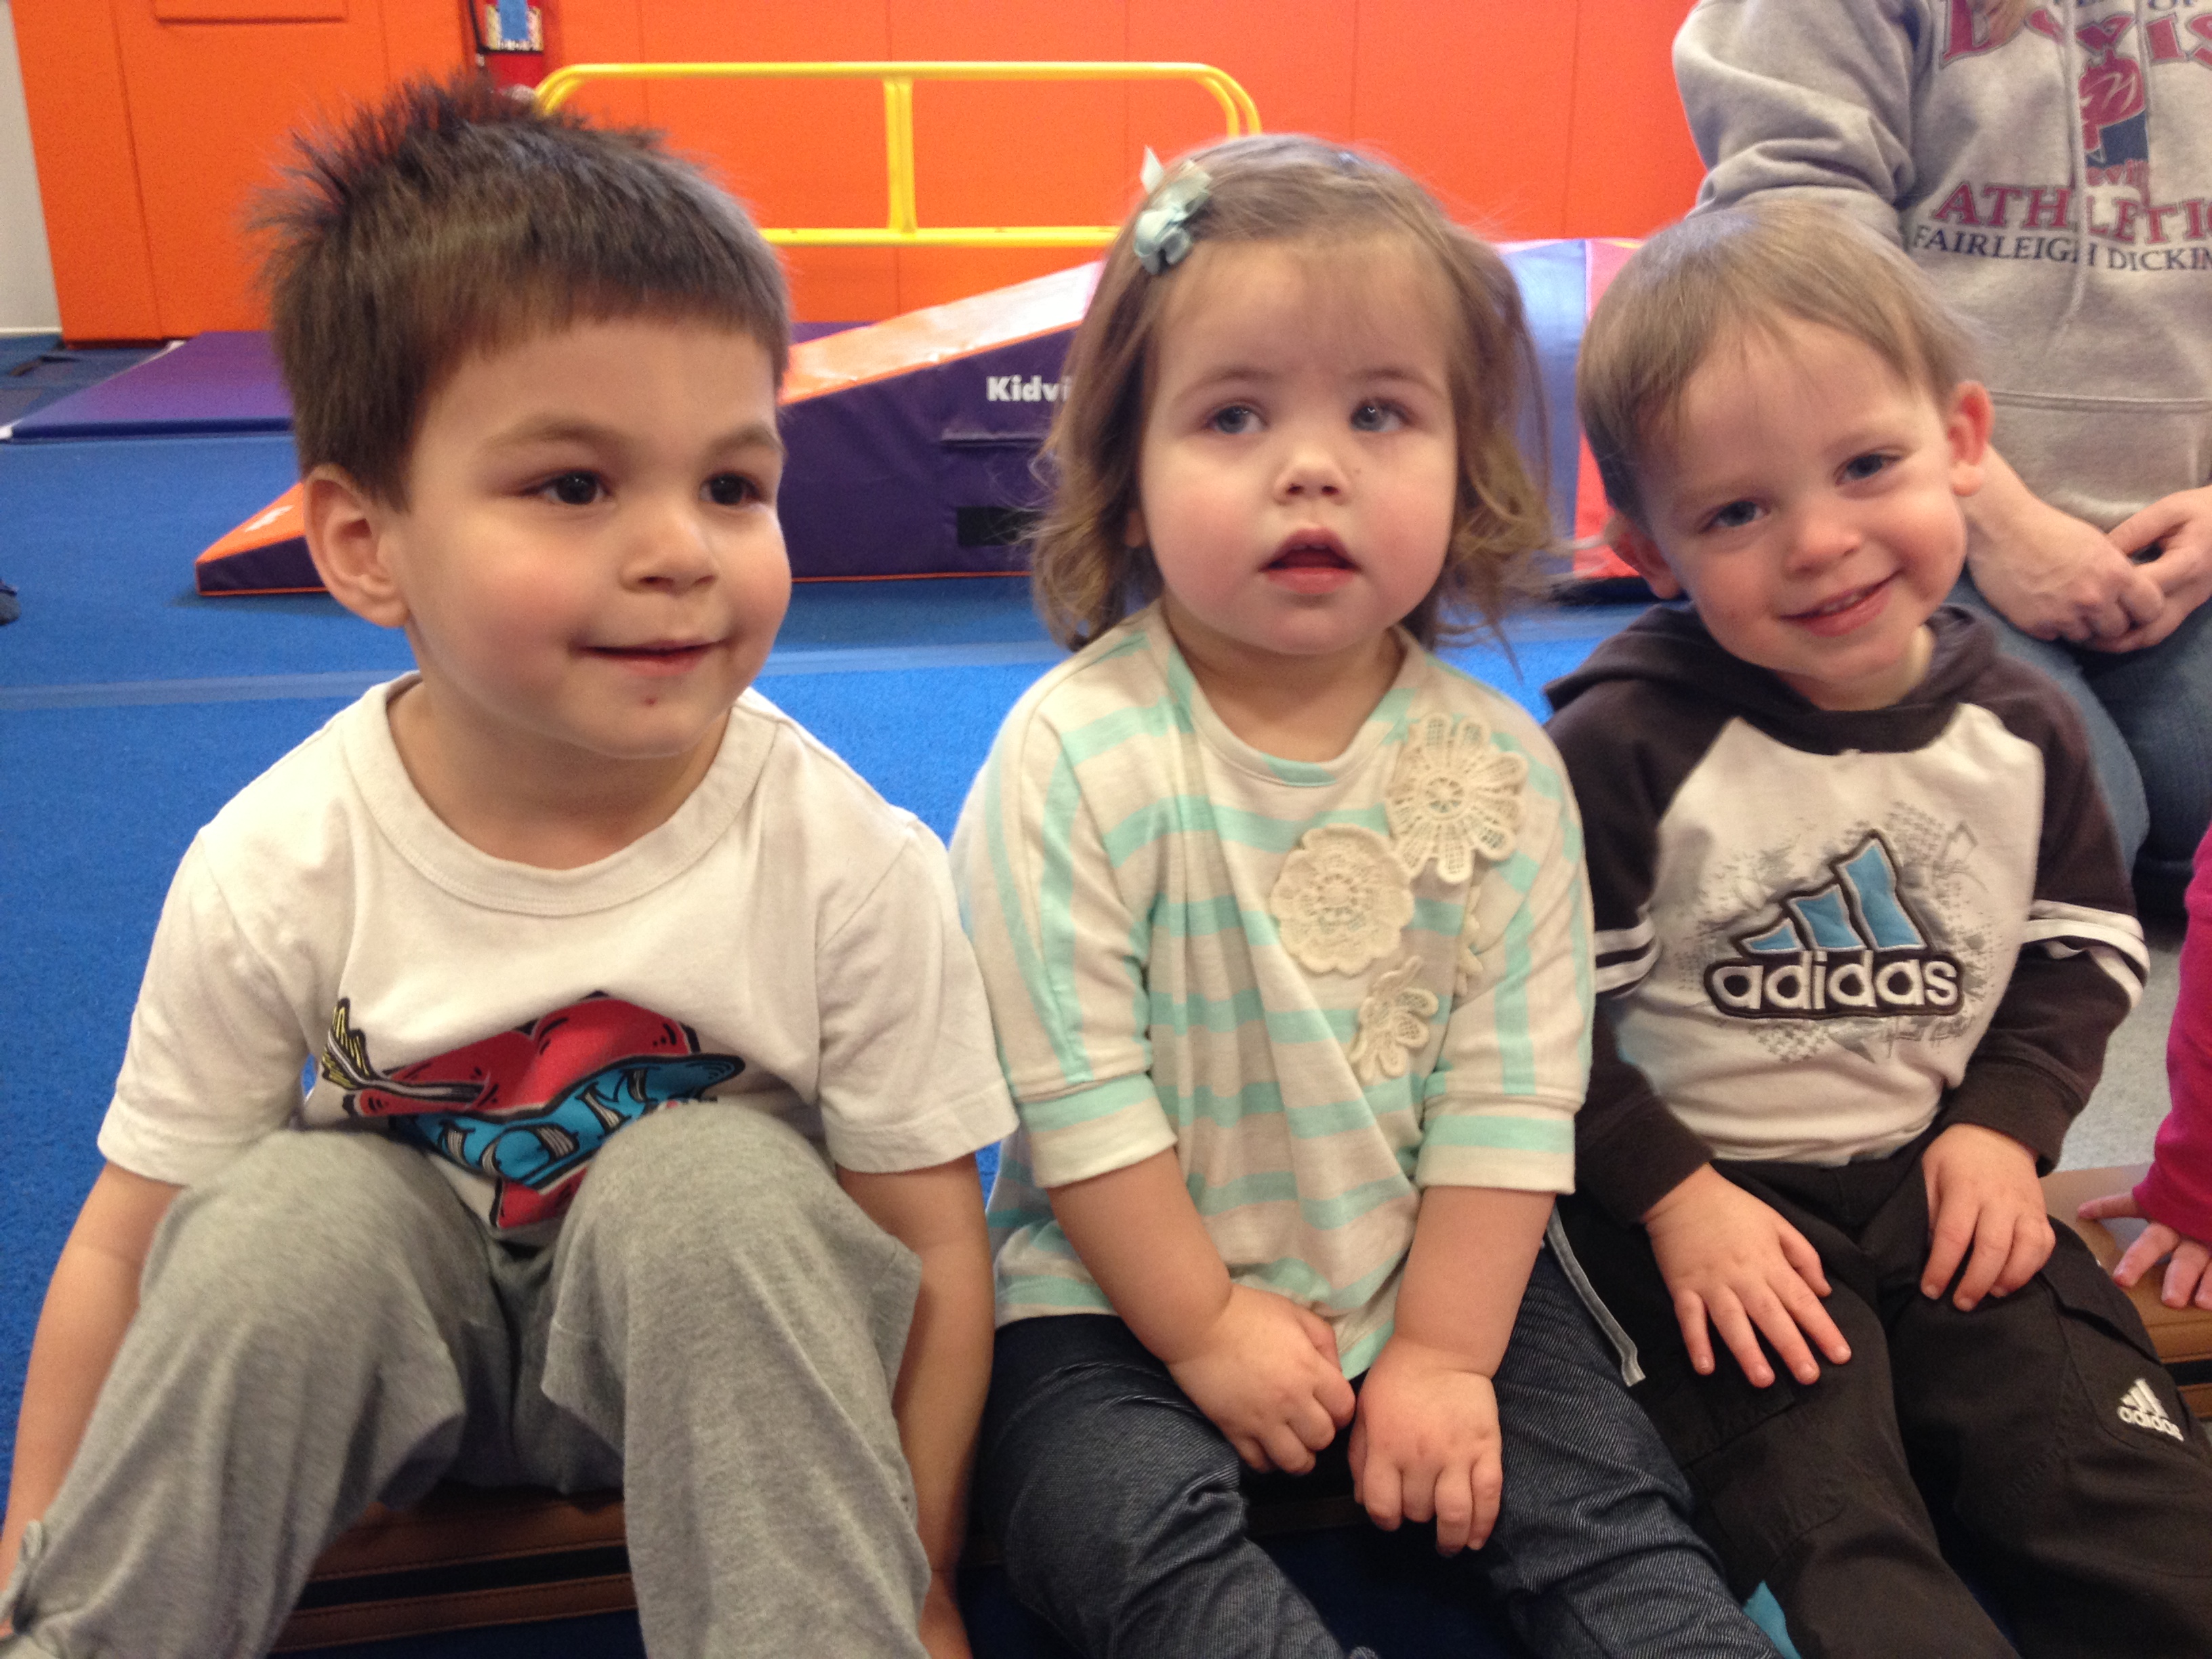 Open Play Sessions allow kids to make new friends and increase social skills!